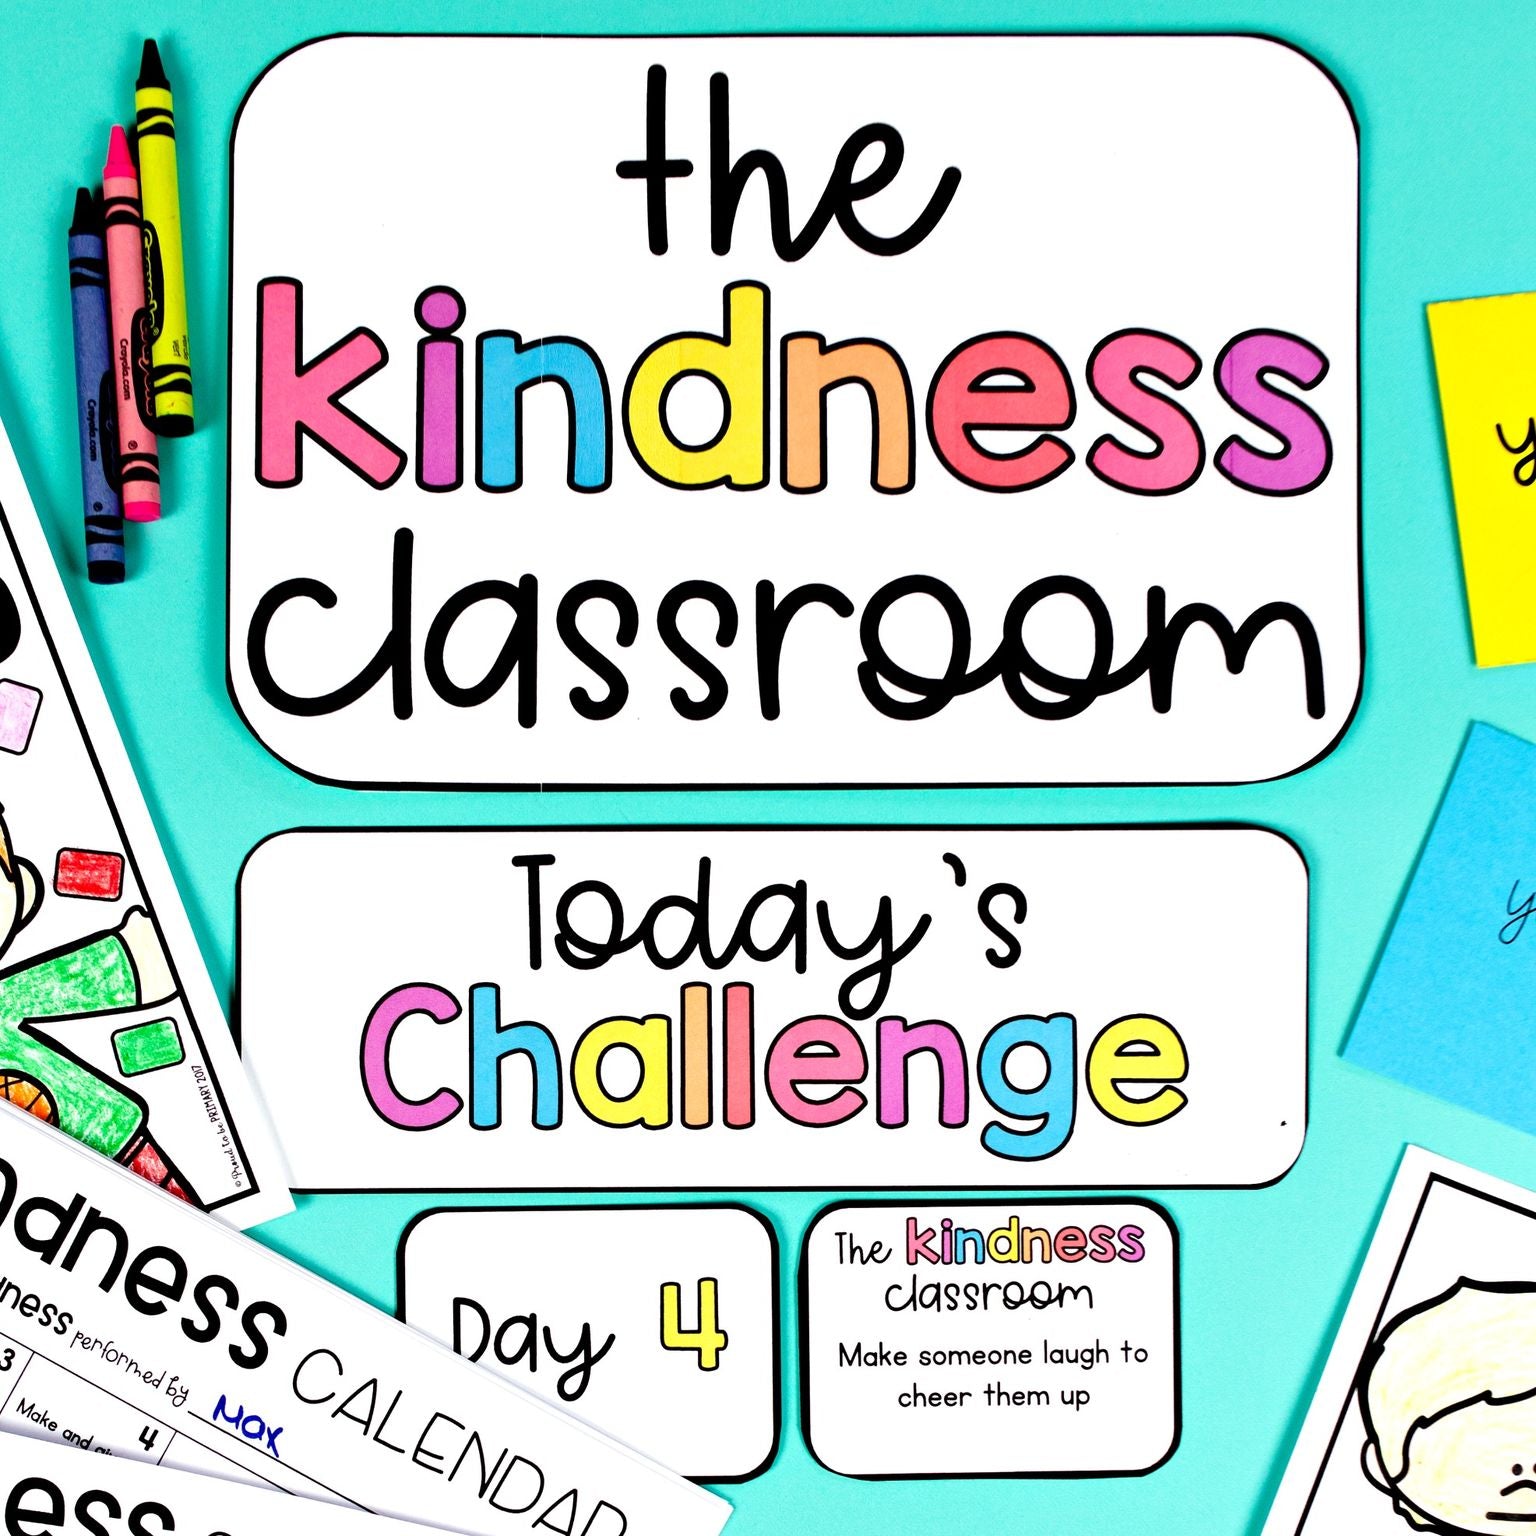 Kindness Classroom Challenge + Calendars - Social Emotional Learning SEL - Proud to be Primary